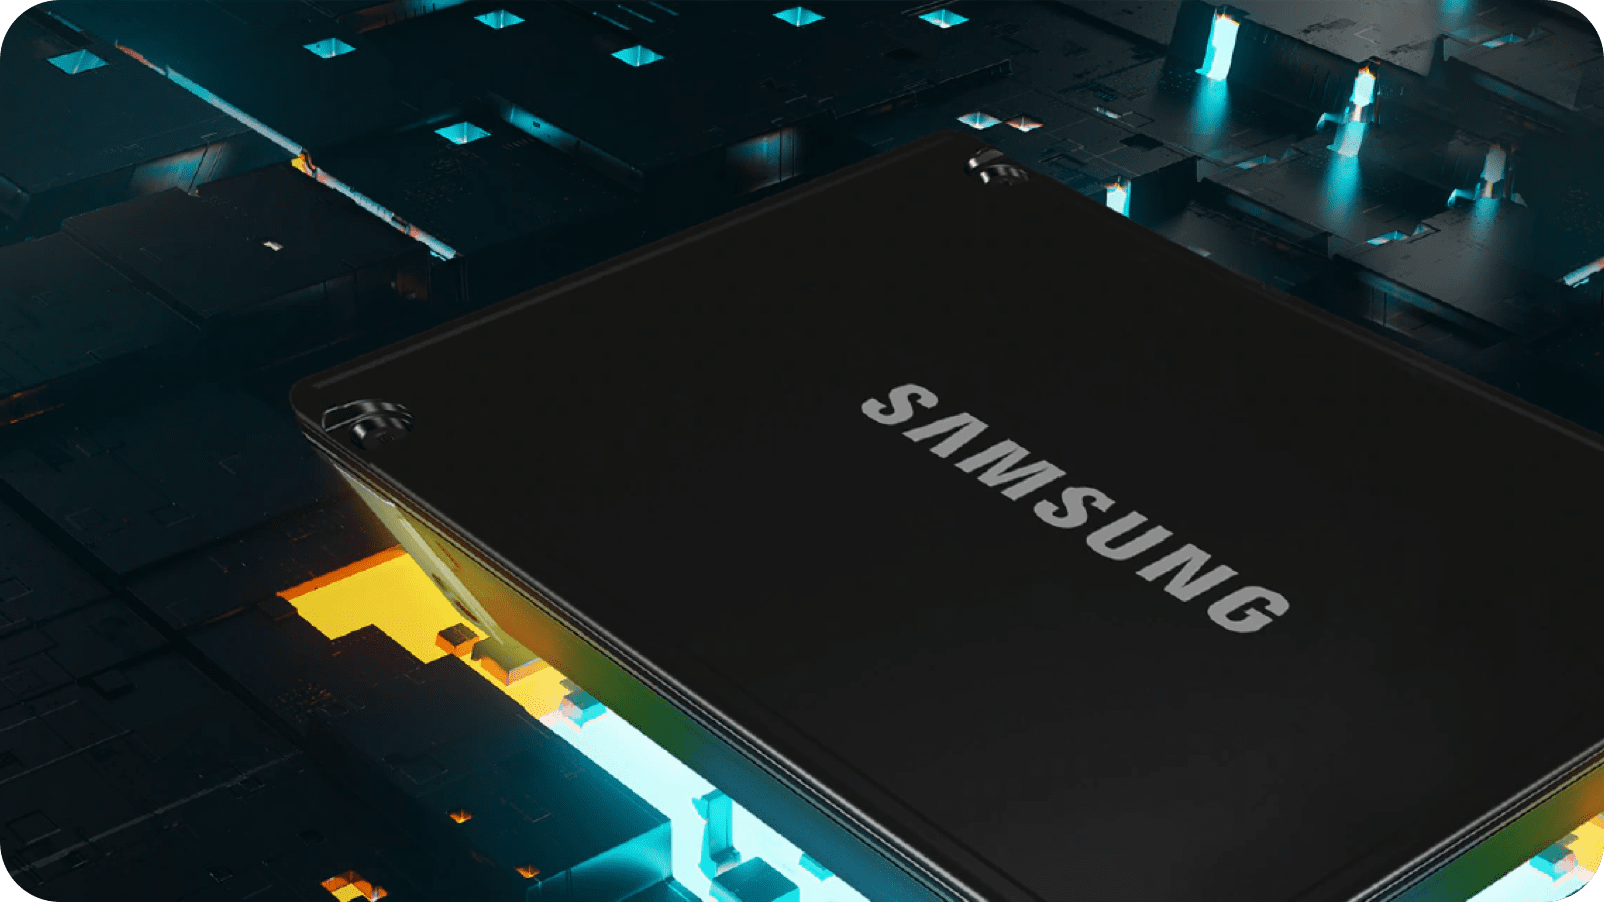 A close-up of a Samsung SSD with a dynamic, illuminated digital environment in the background